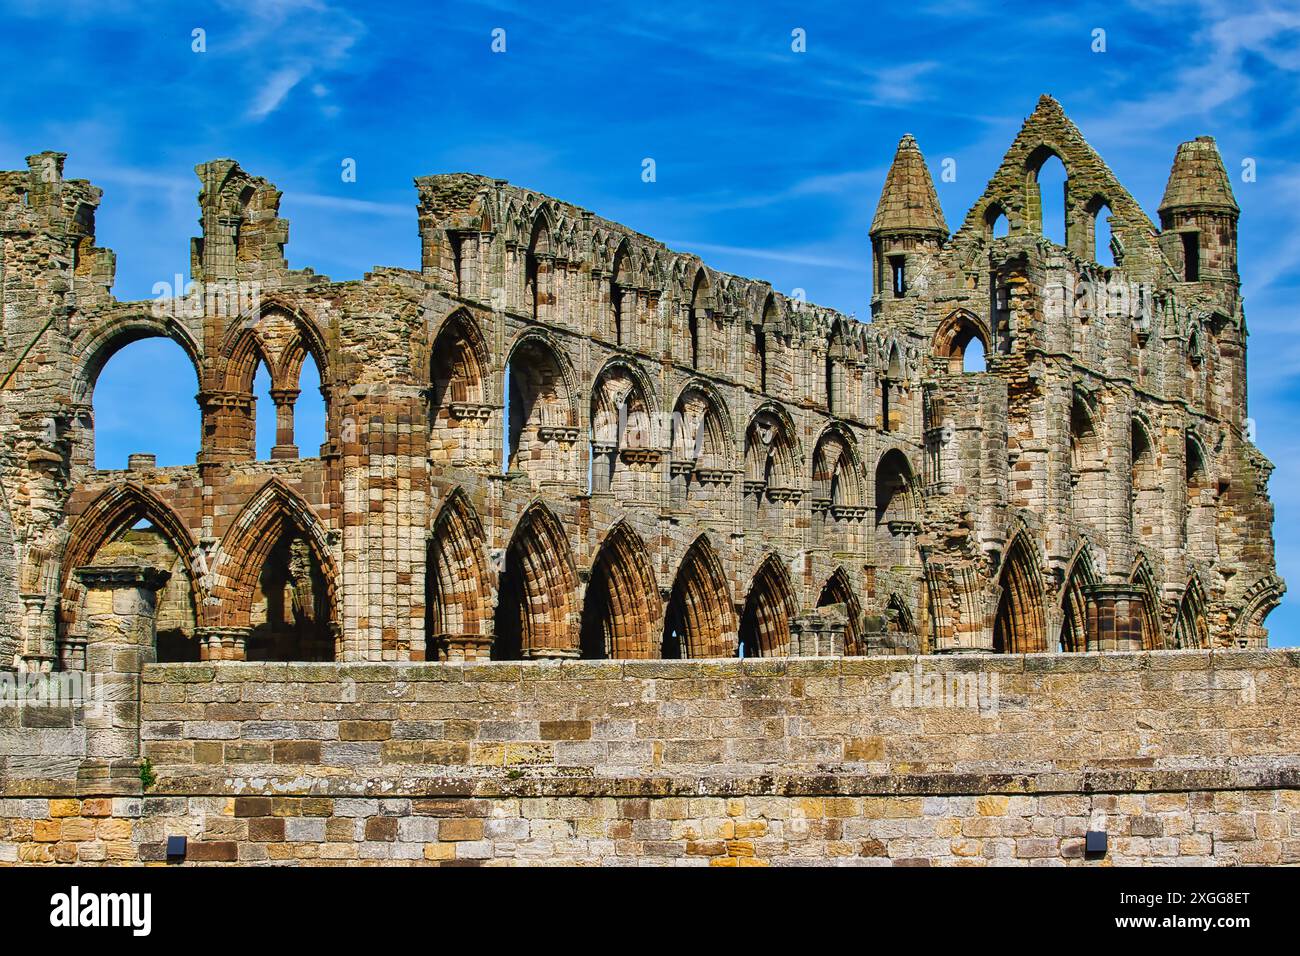 A historic stone abbey ruin with arched windows and intricate architectural details against a blue sky, Whitby Abbey, Whitby, Yorkshire, England, Unit Stock Photo